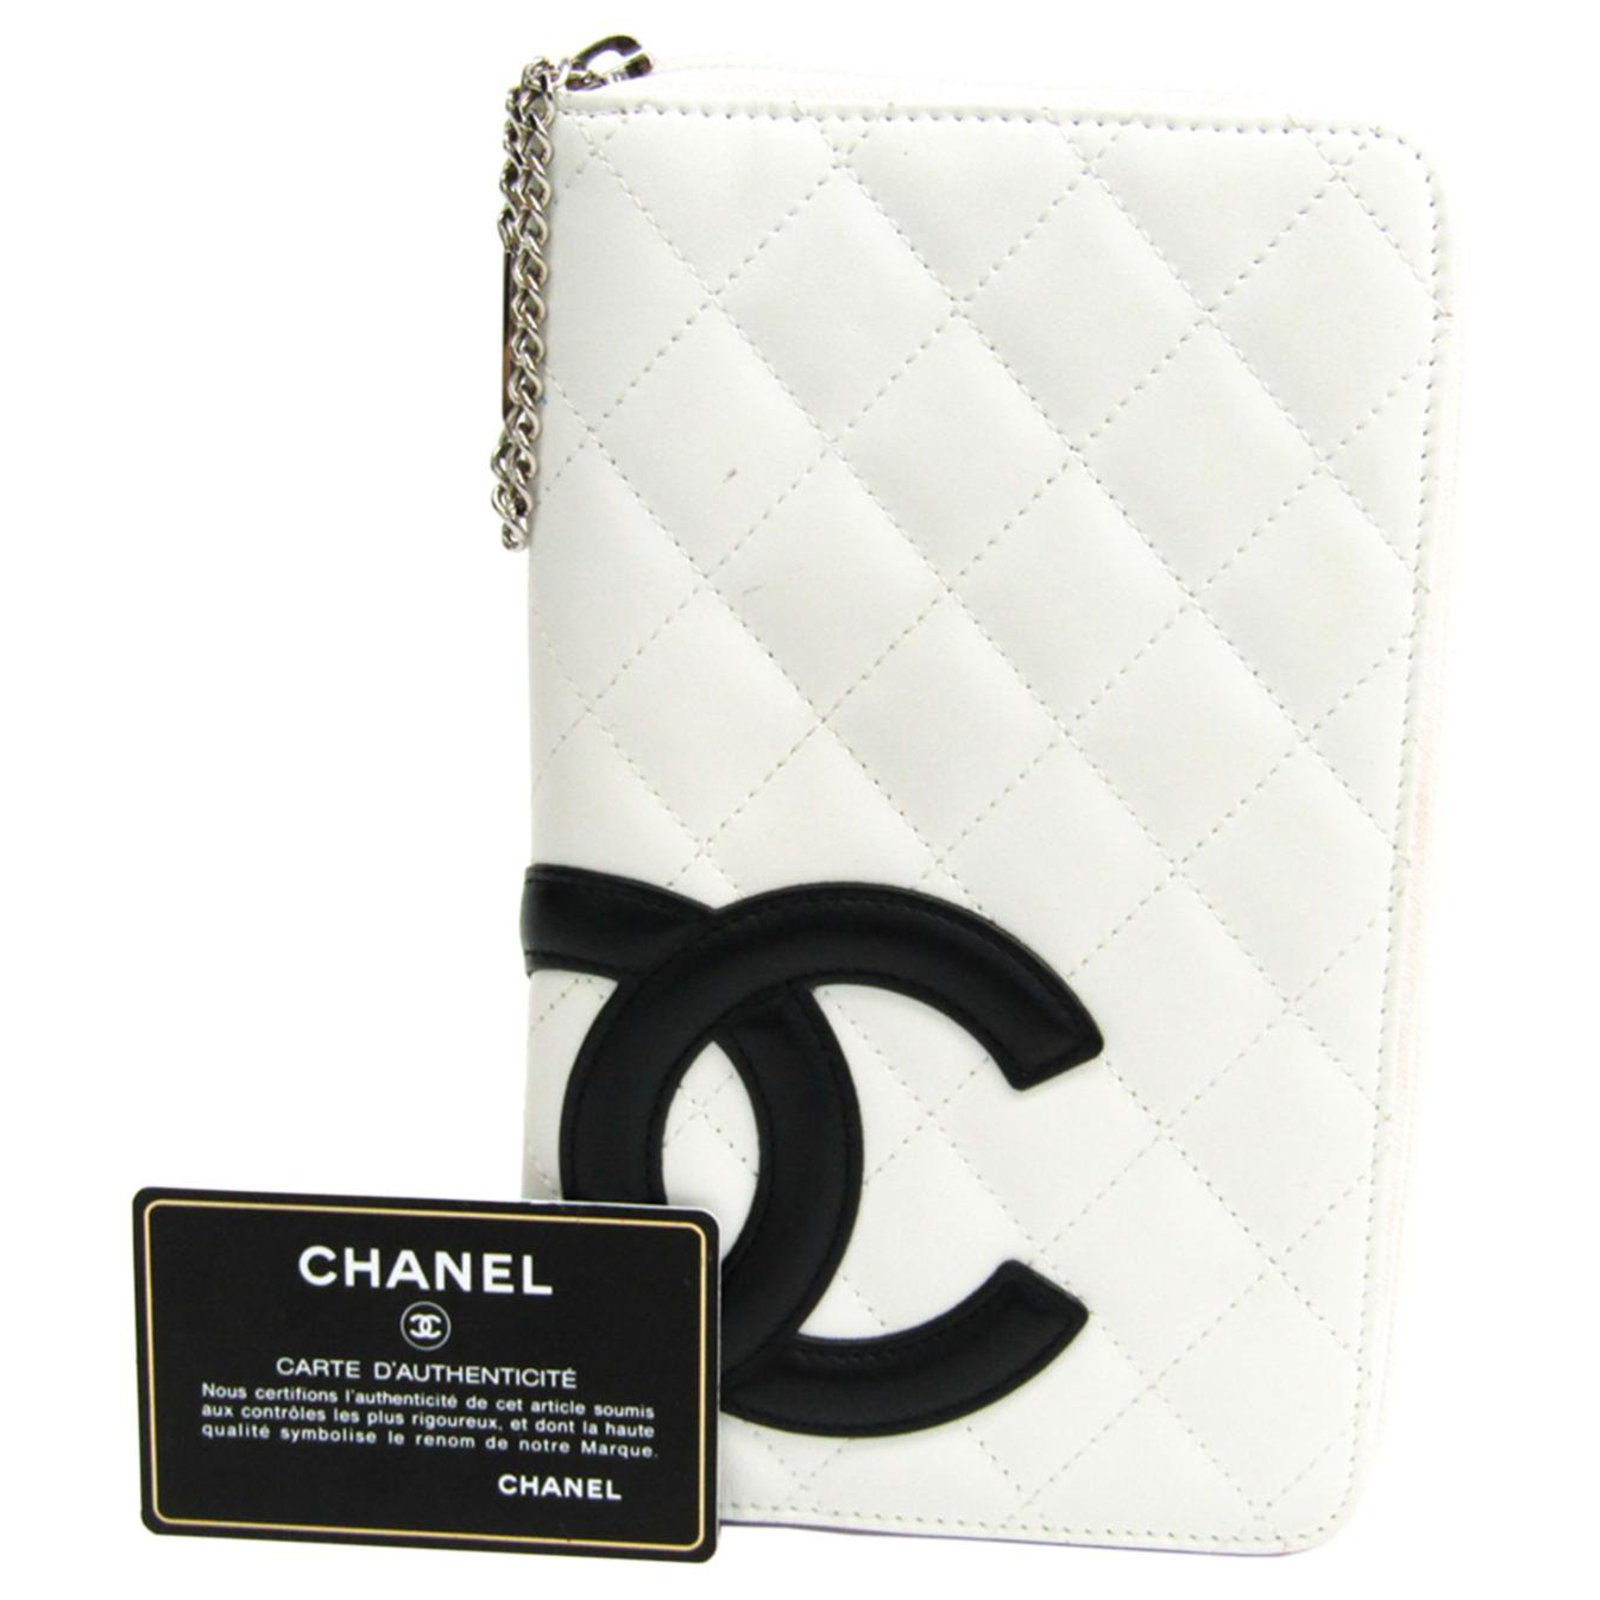 Chanel Black Quilted Calfskin Cambon Wallet Q6AIGH3PKB032